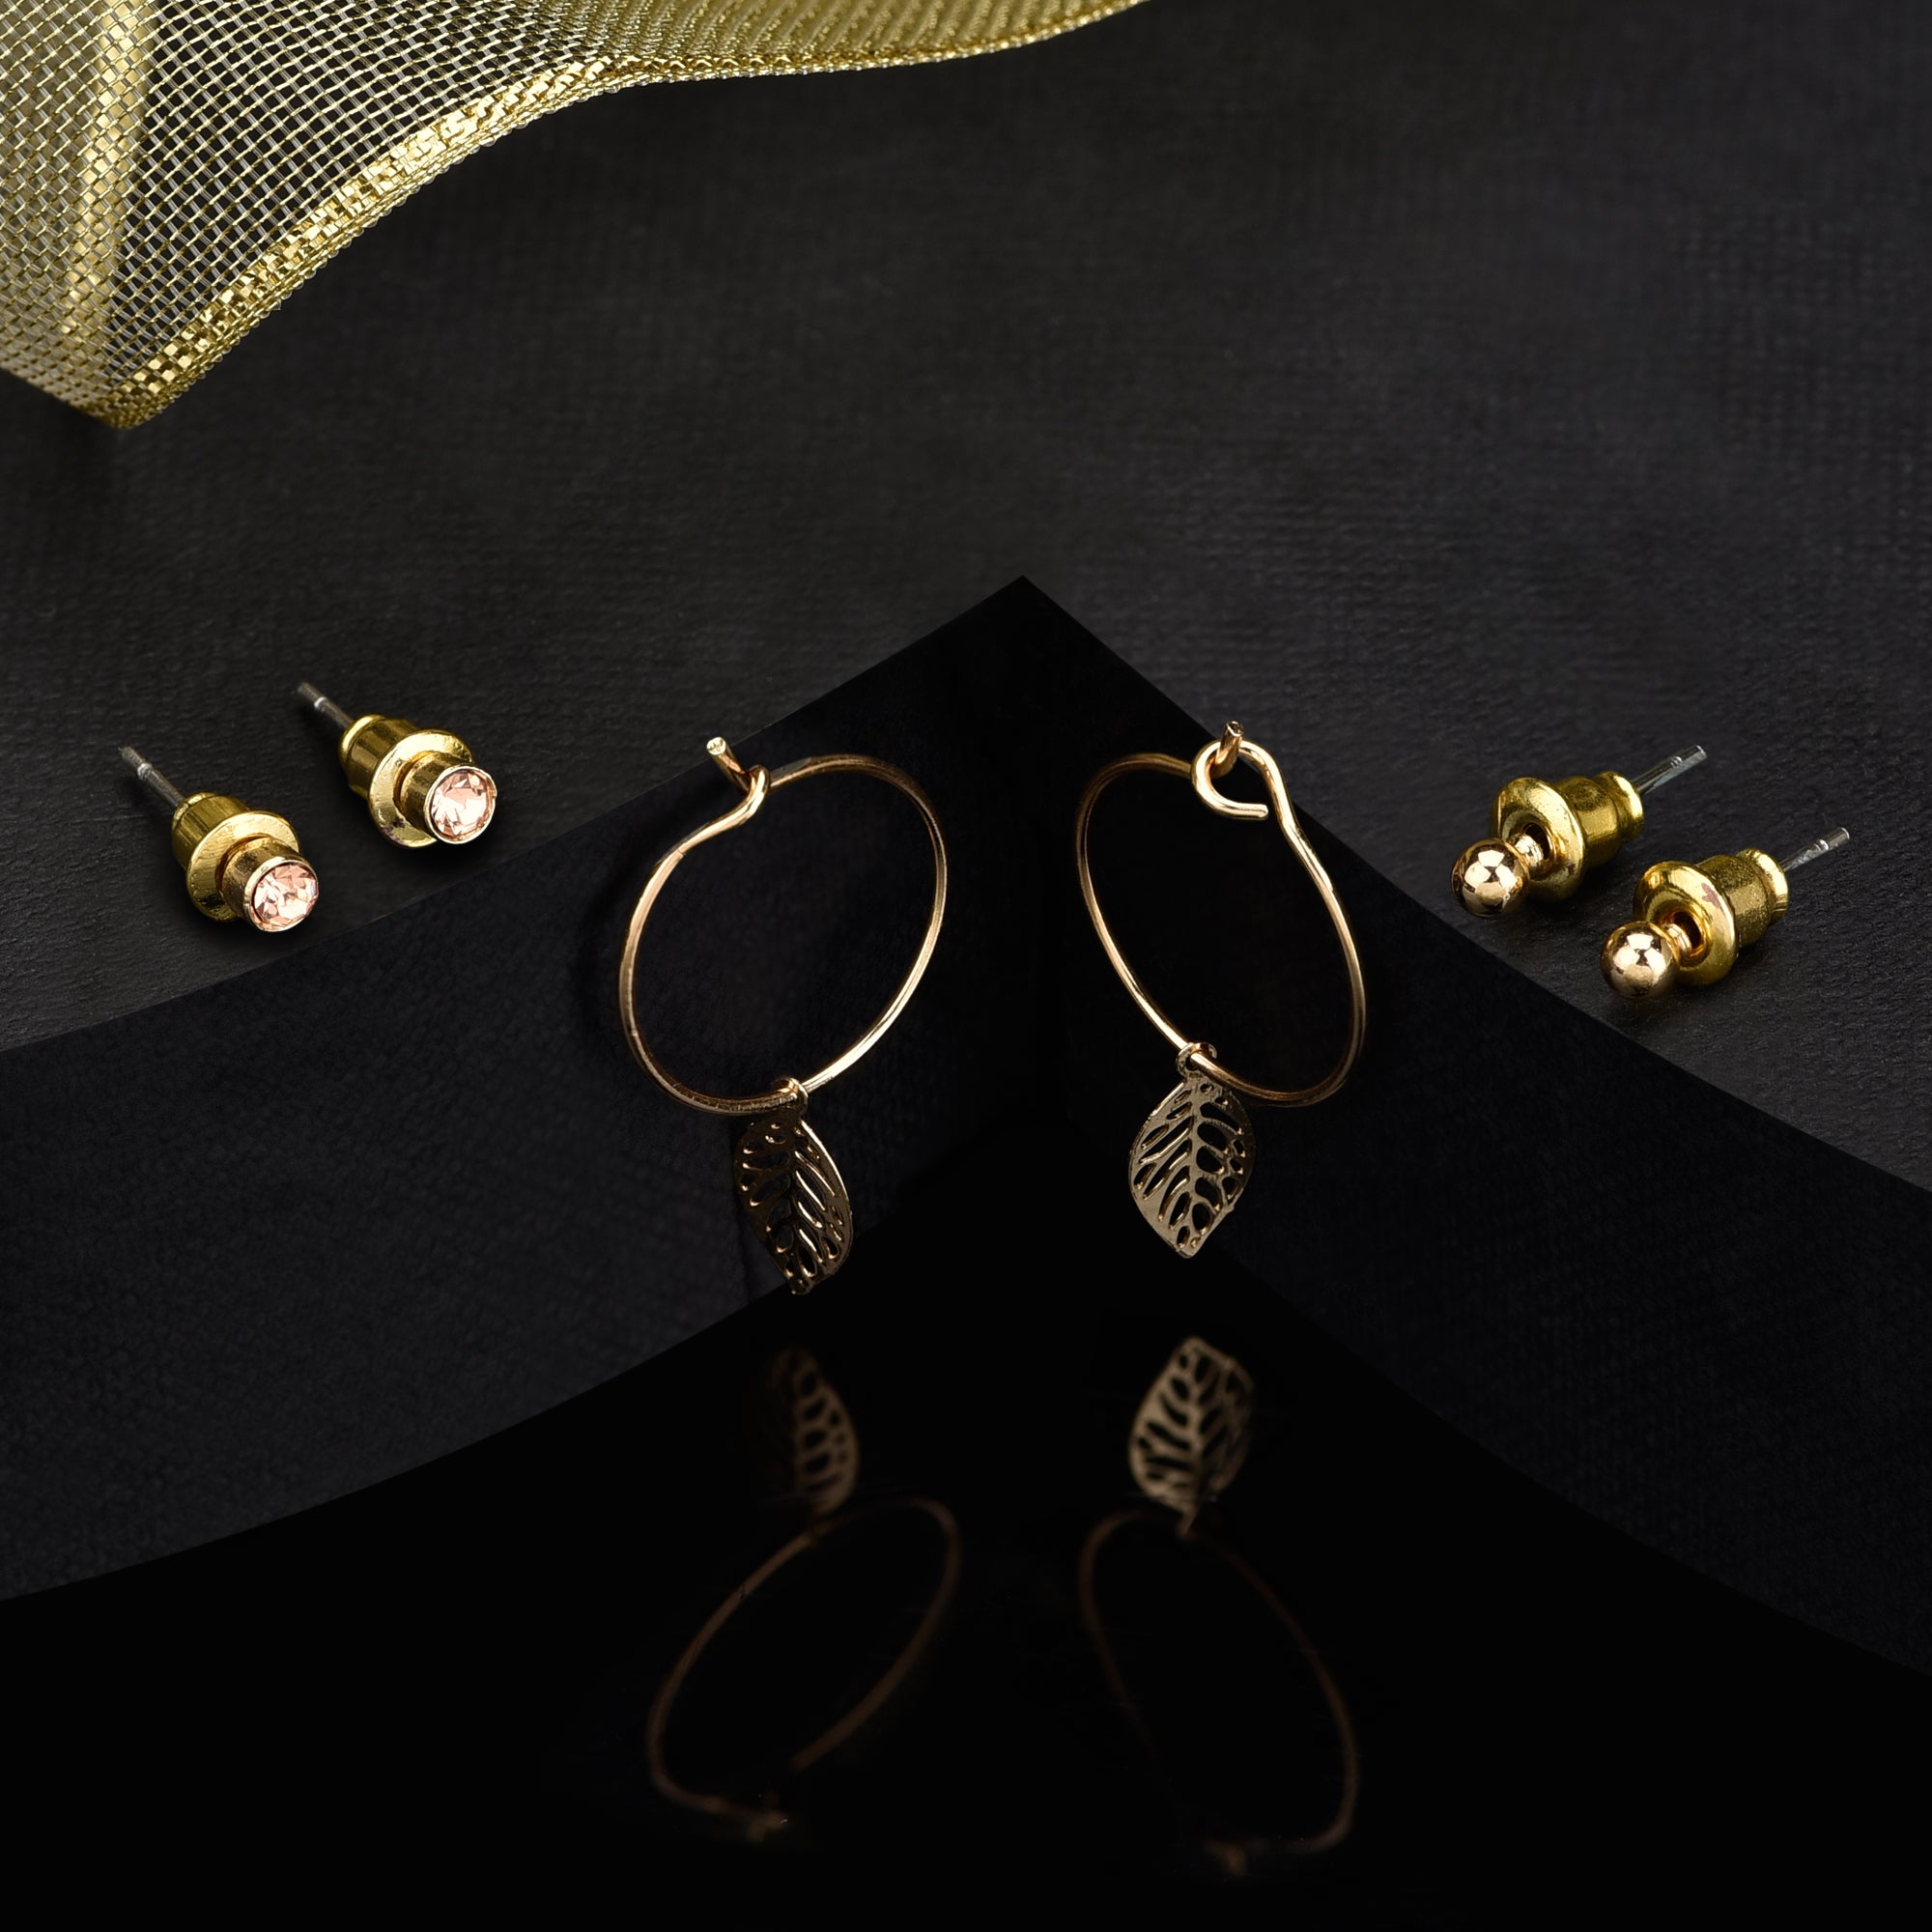 Buy Set Of 3 Textured Mini Hoop Earrings Online - Accessorize India -  Accessorize India